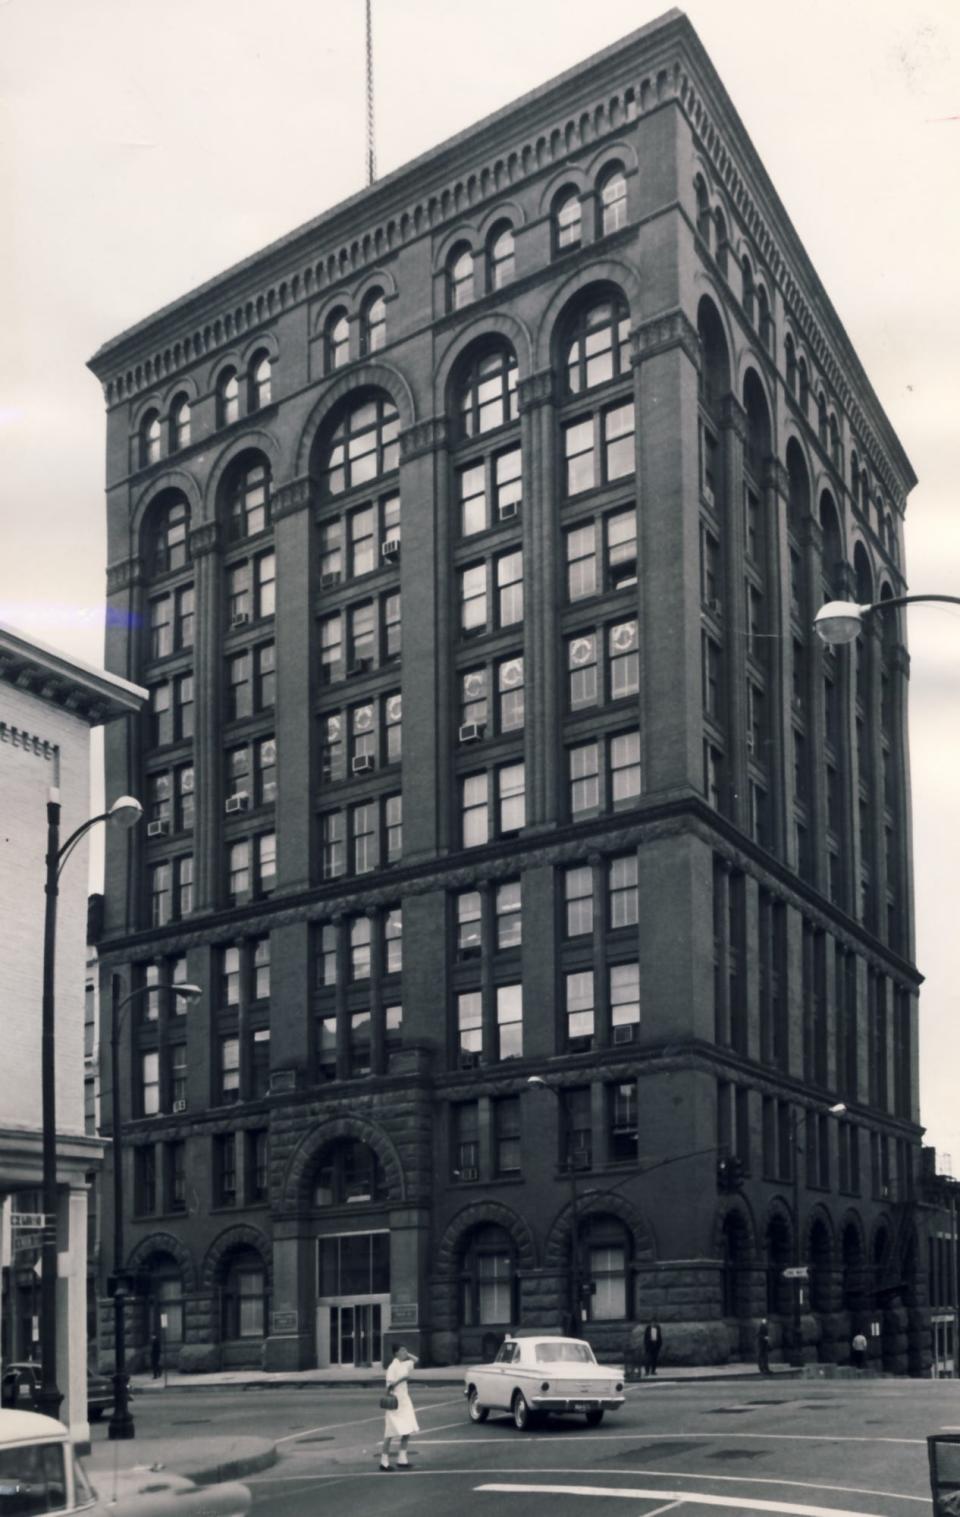 April 10, 1965 - Louisville's first "skyscraper," the 10-story Columbia Building was located at Fourth and Main streets. Erected in 1890, the building was purchased by the City Urban Renewal Agency to make way for an apartment-commercial complex in the Downtown Riverfront Project.